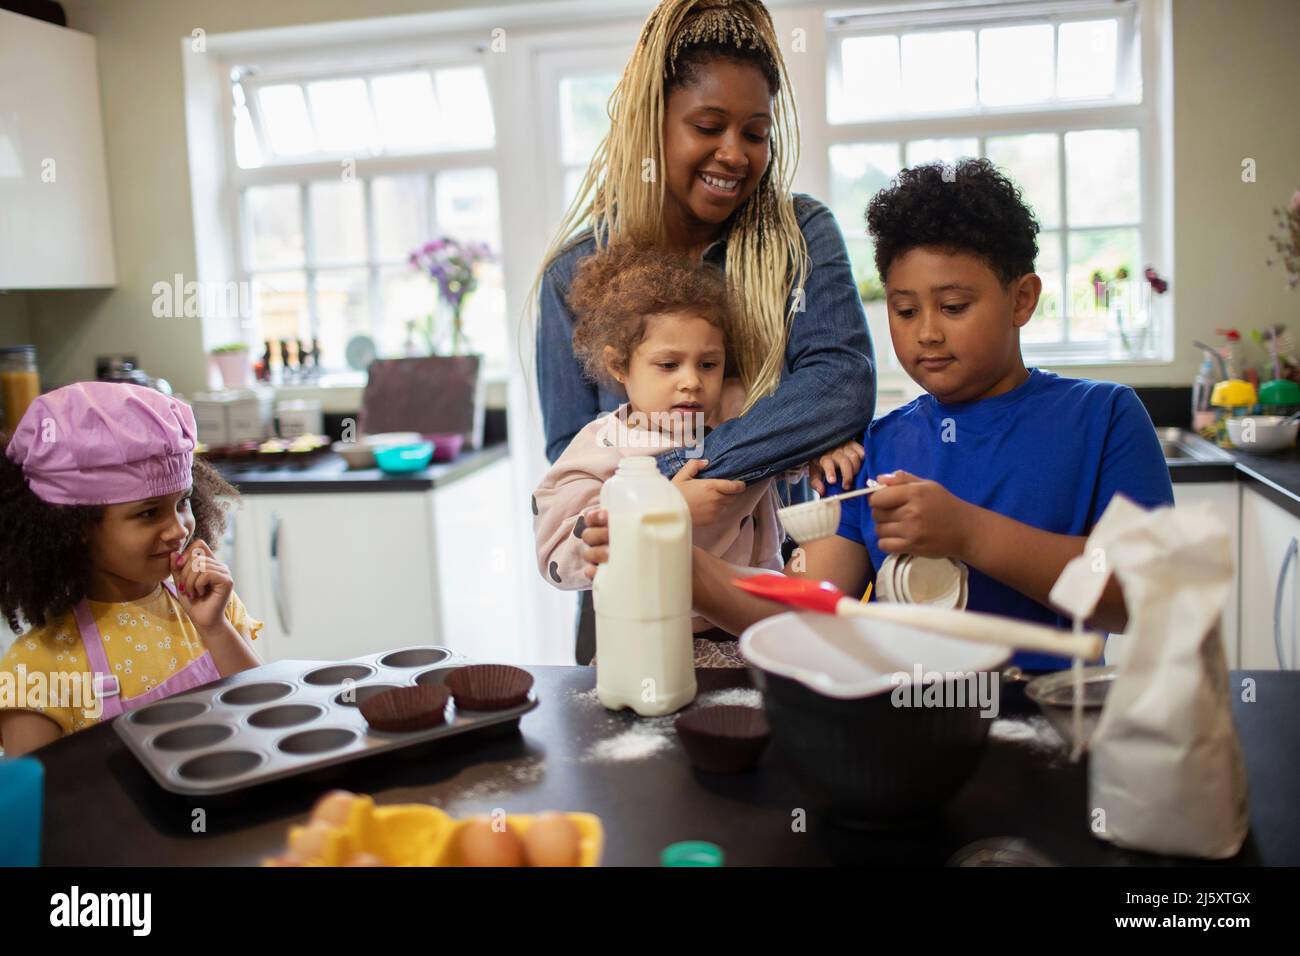 Mother and kids baking in kitchen Stock Photo